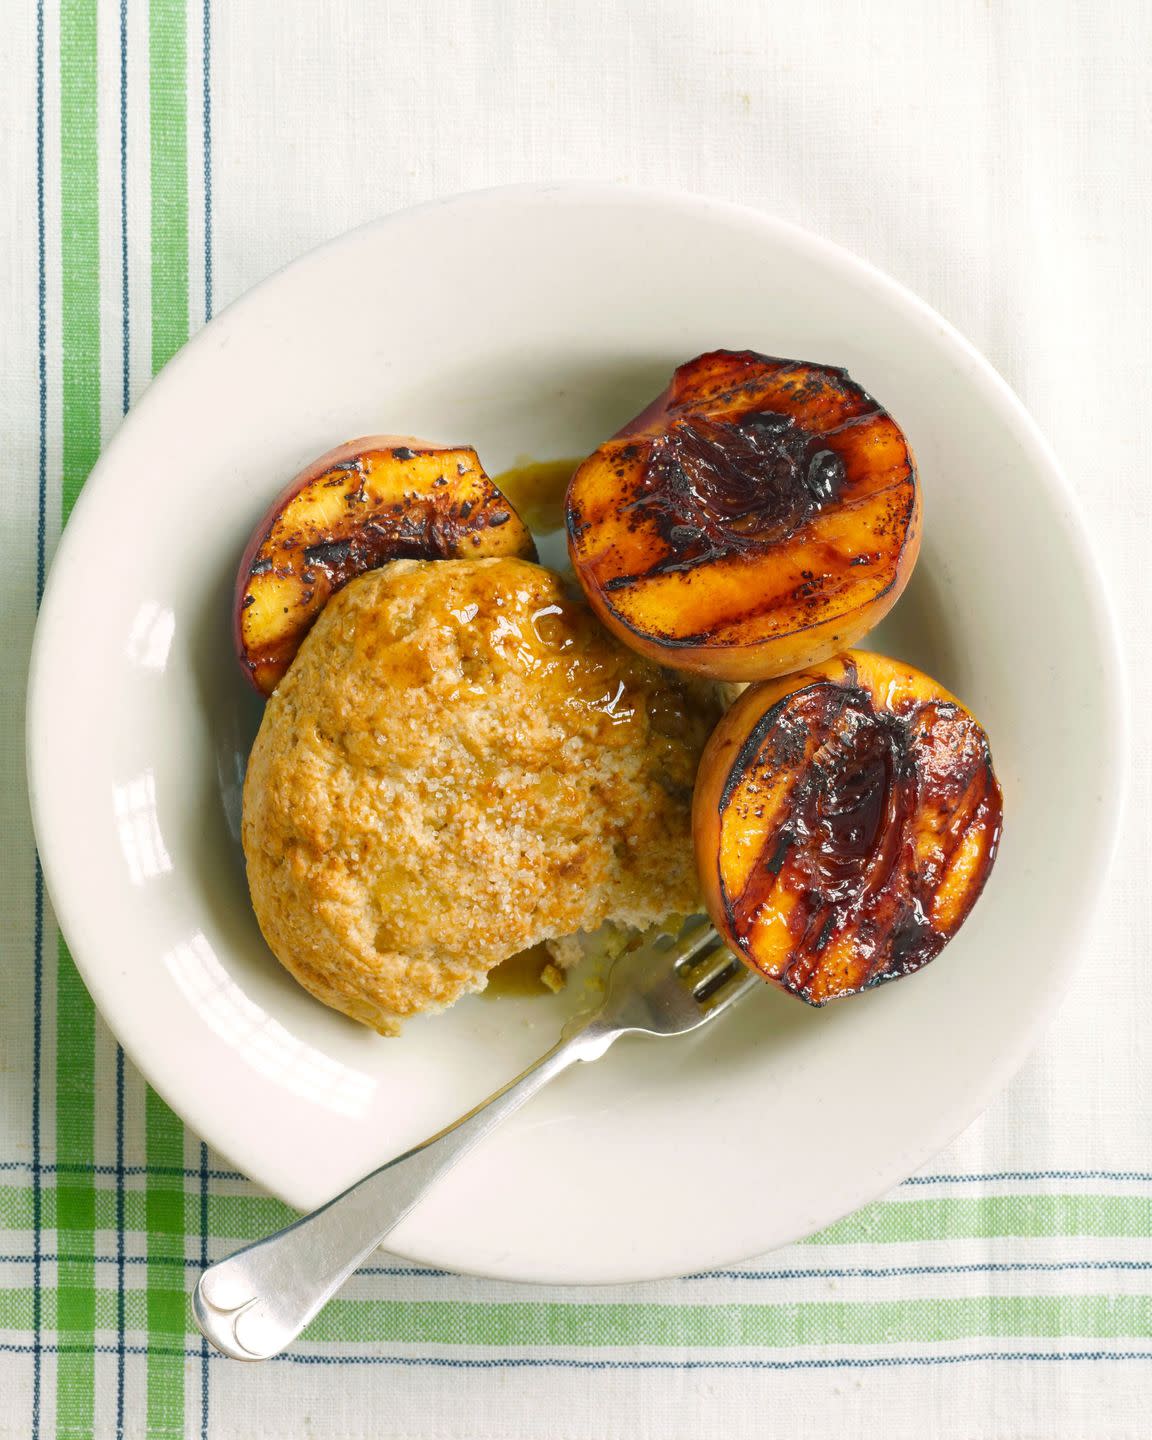 grilled peach cobbler on a plate with a fork